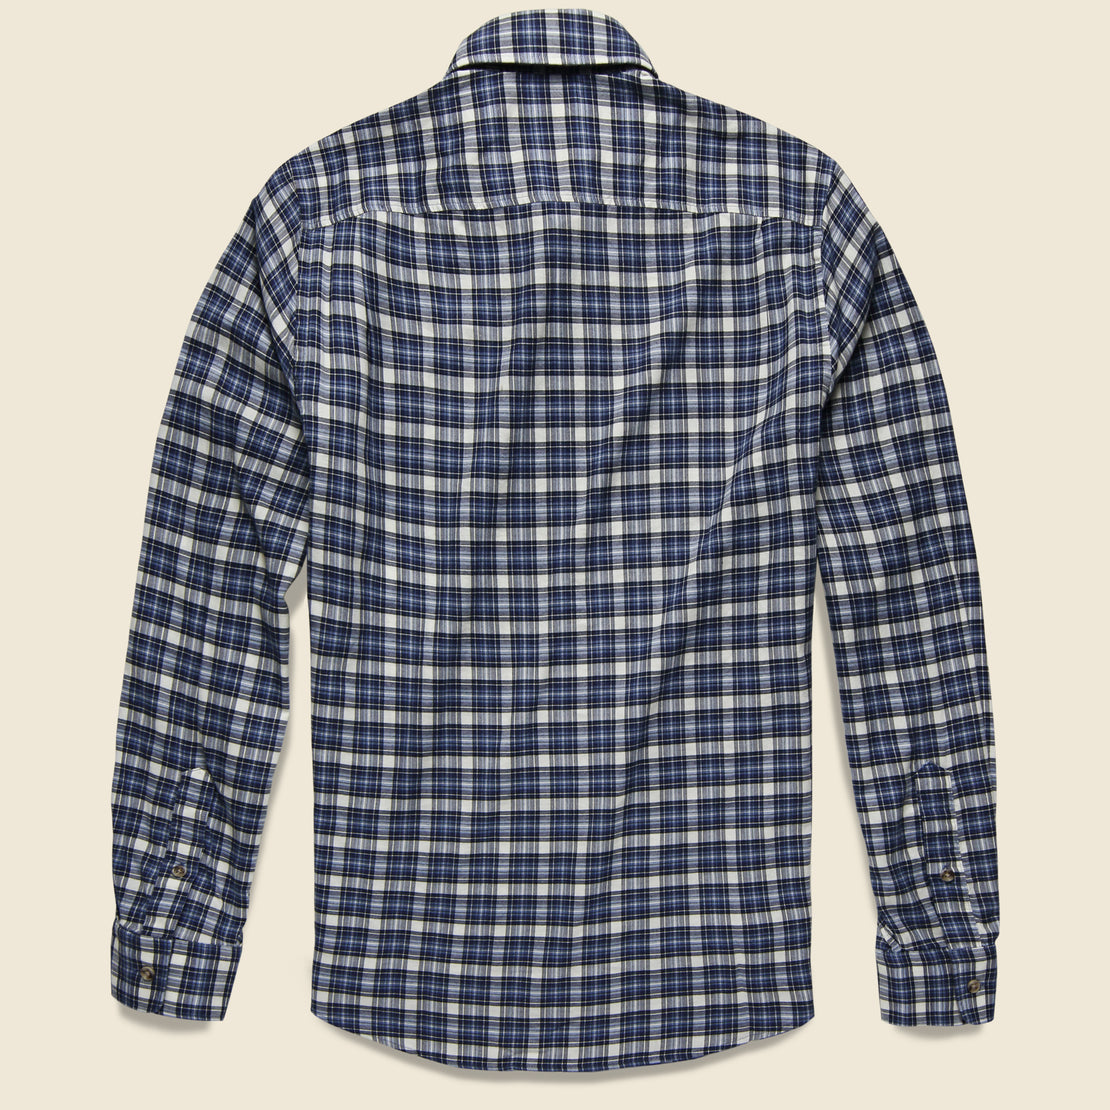 Everyday Shirt - Cream/Navy Tartan - Faherty - STAG Provisions - Tops - L/S Woven - Plaid